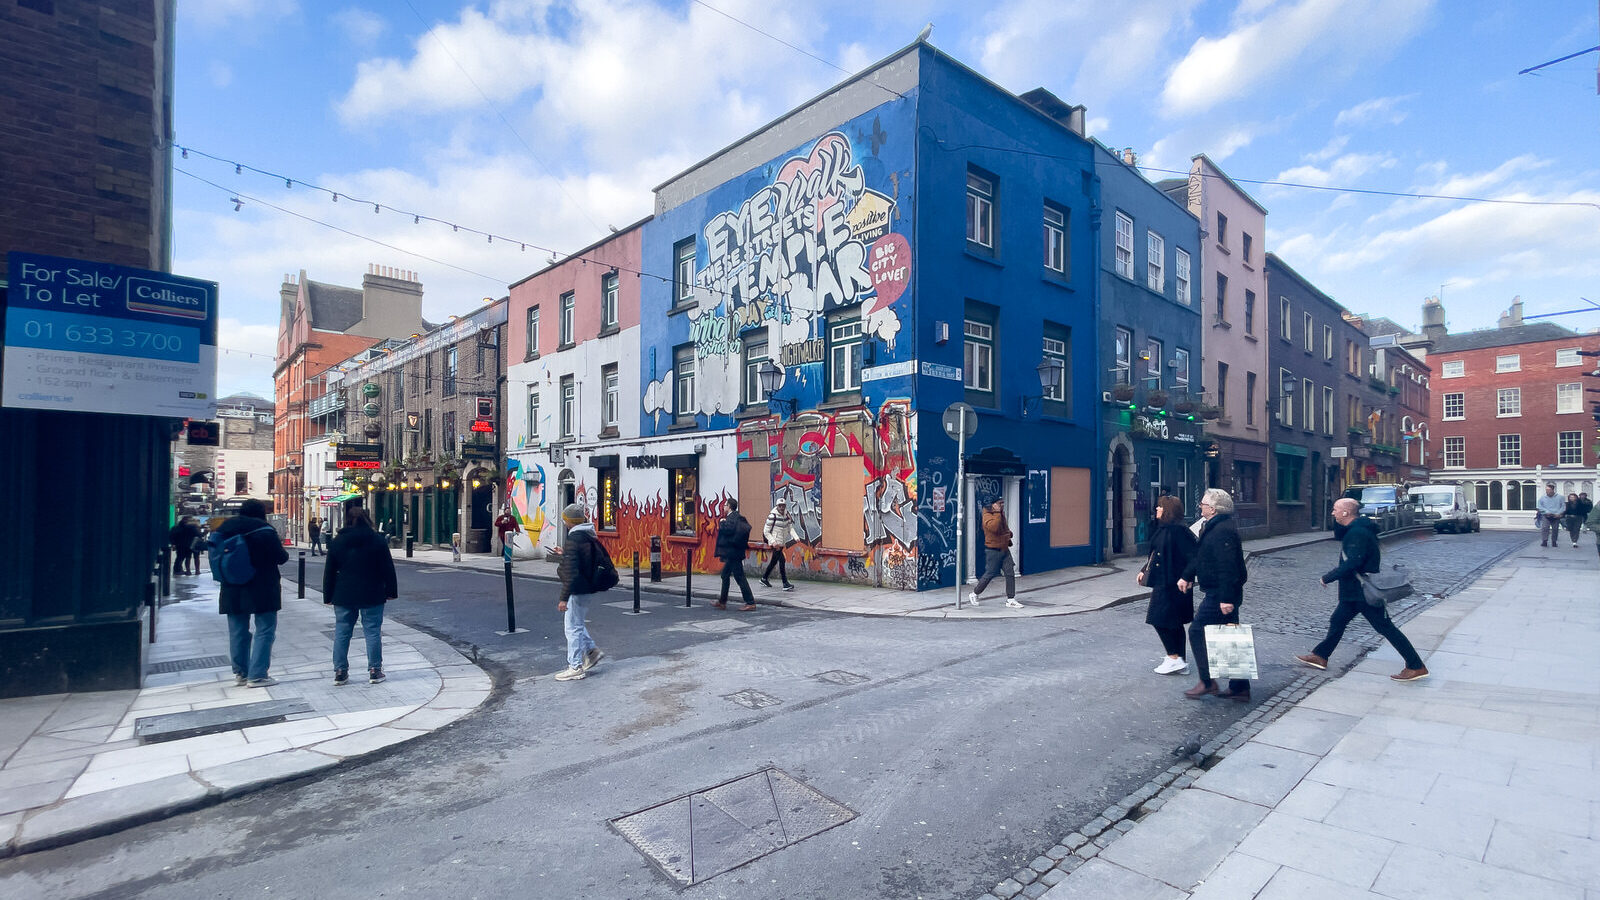 VISITING DUBLIN FOR ST PATRICK'S WEEKEND [IS TEMPLE BAR AS GOOD AS MANY CLAIM IT TO BE?]-229506-1